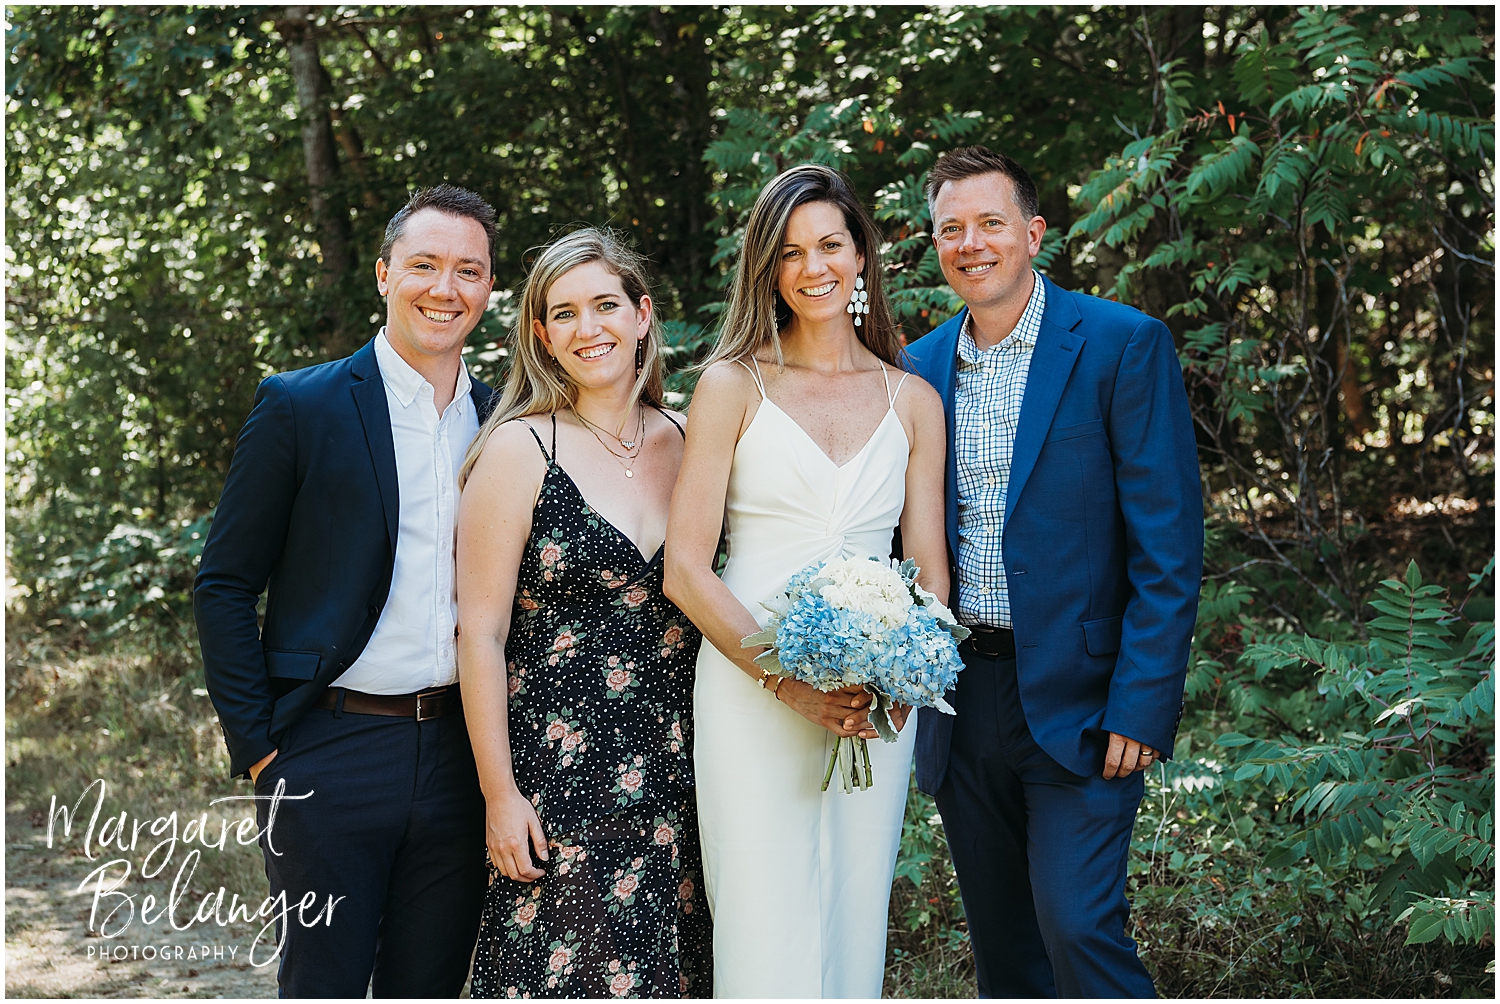 Four people posing for a photo outdoors, with the bride holding a bouquet of flowers.